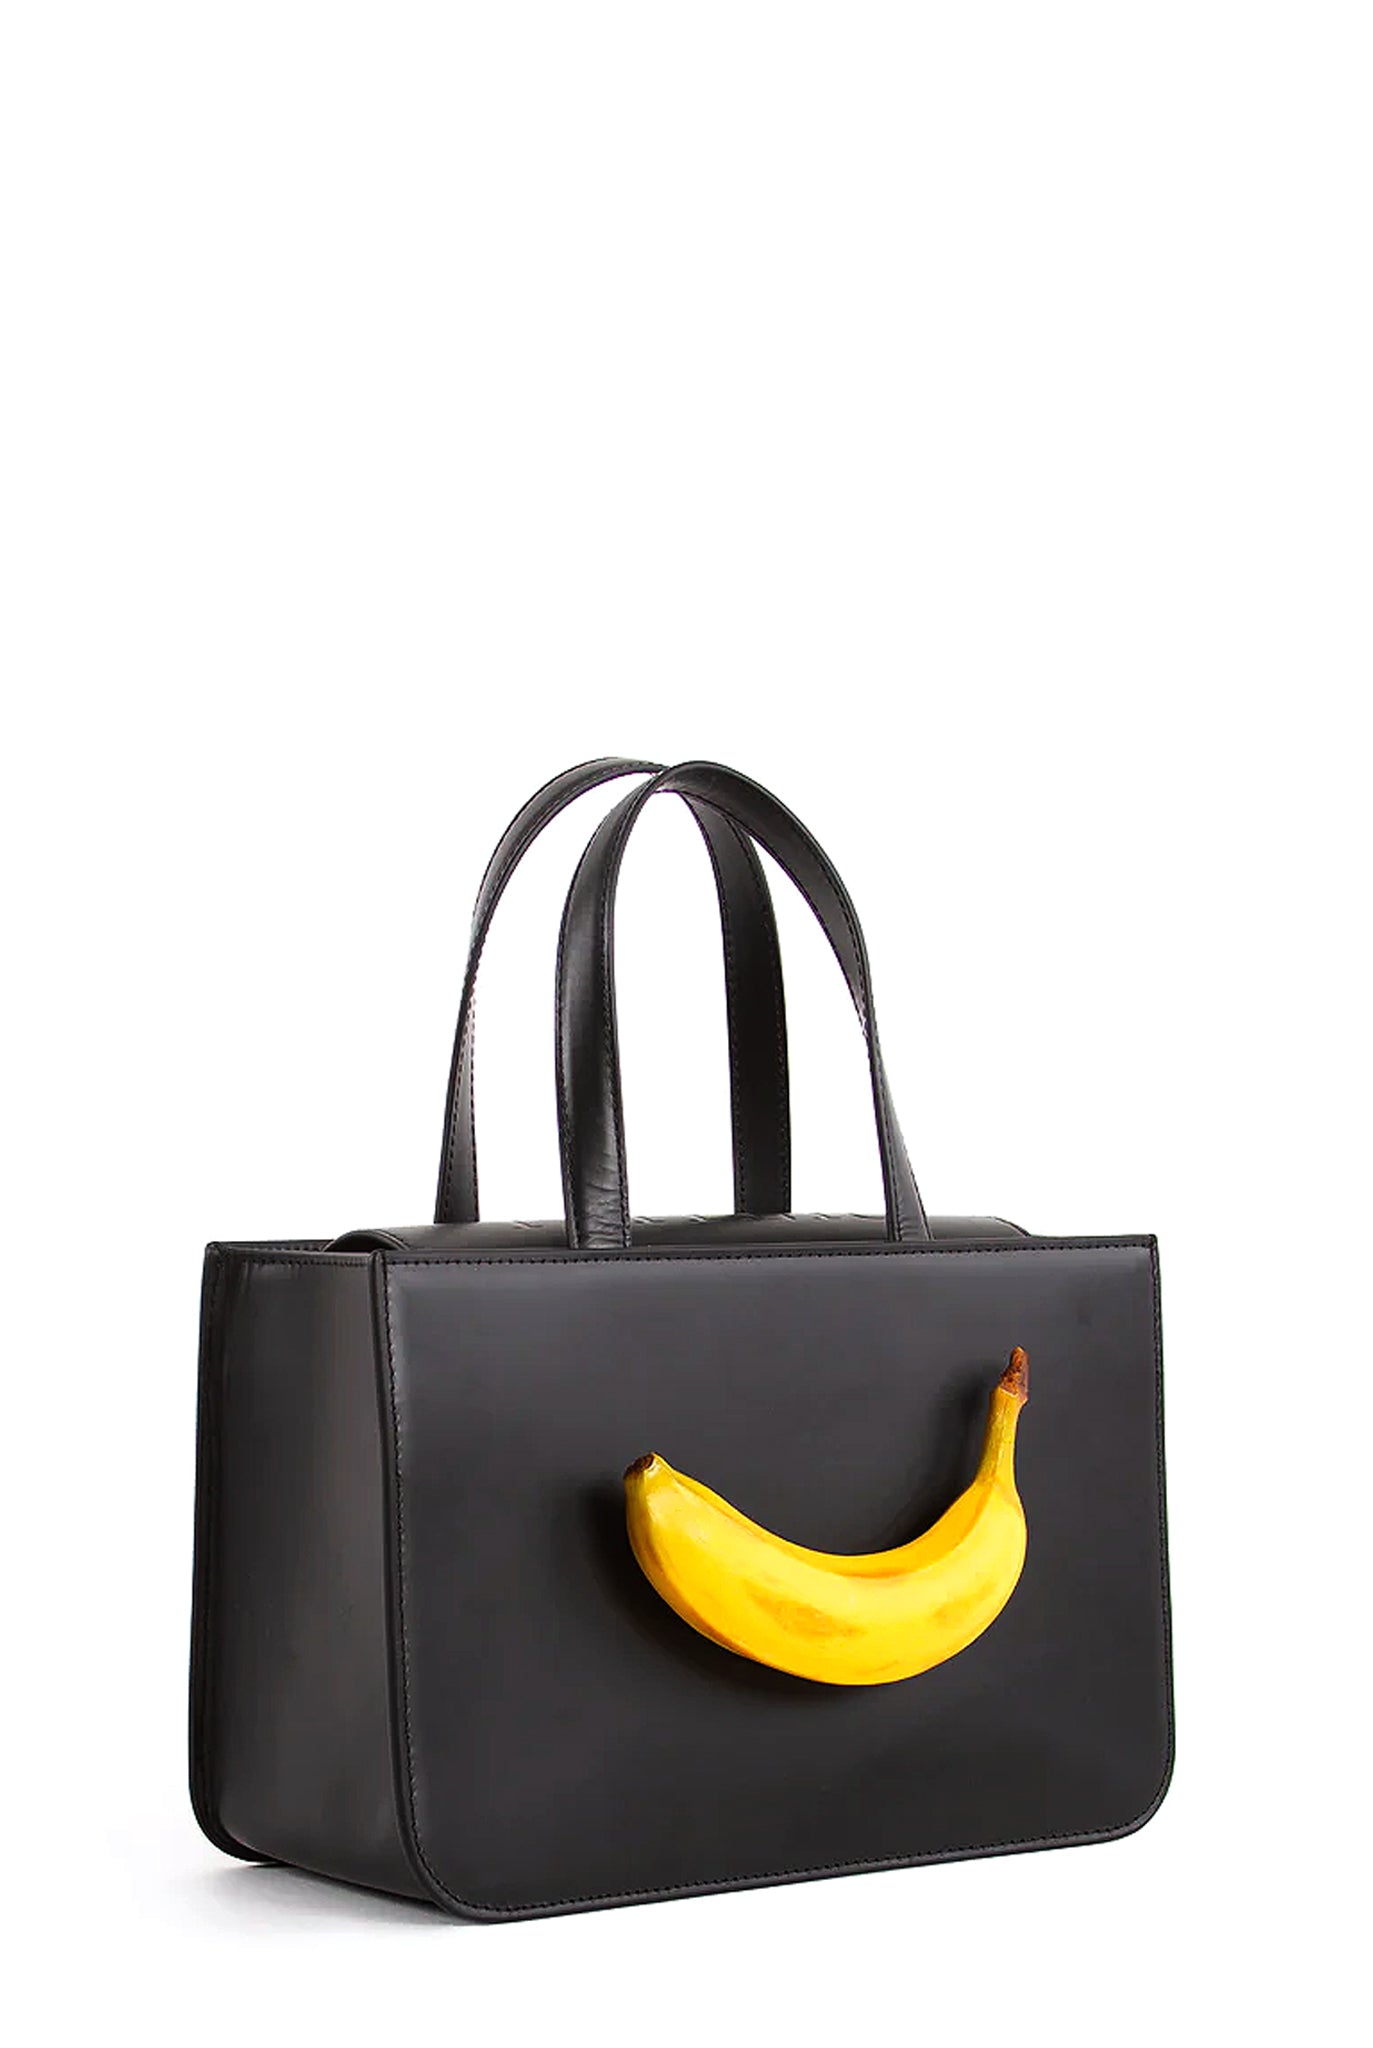 Puppets and Puppets Banana Bag, Black Leather